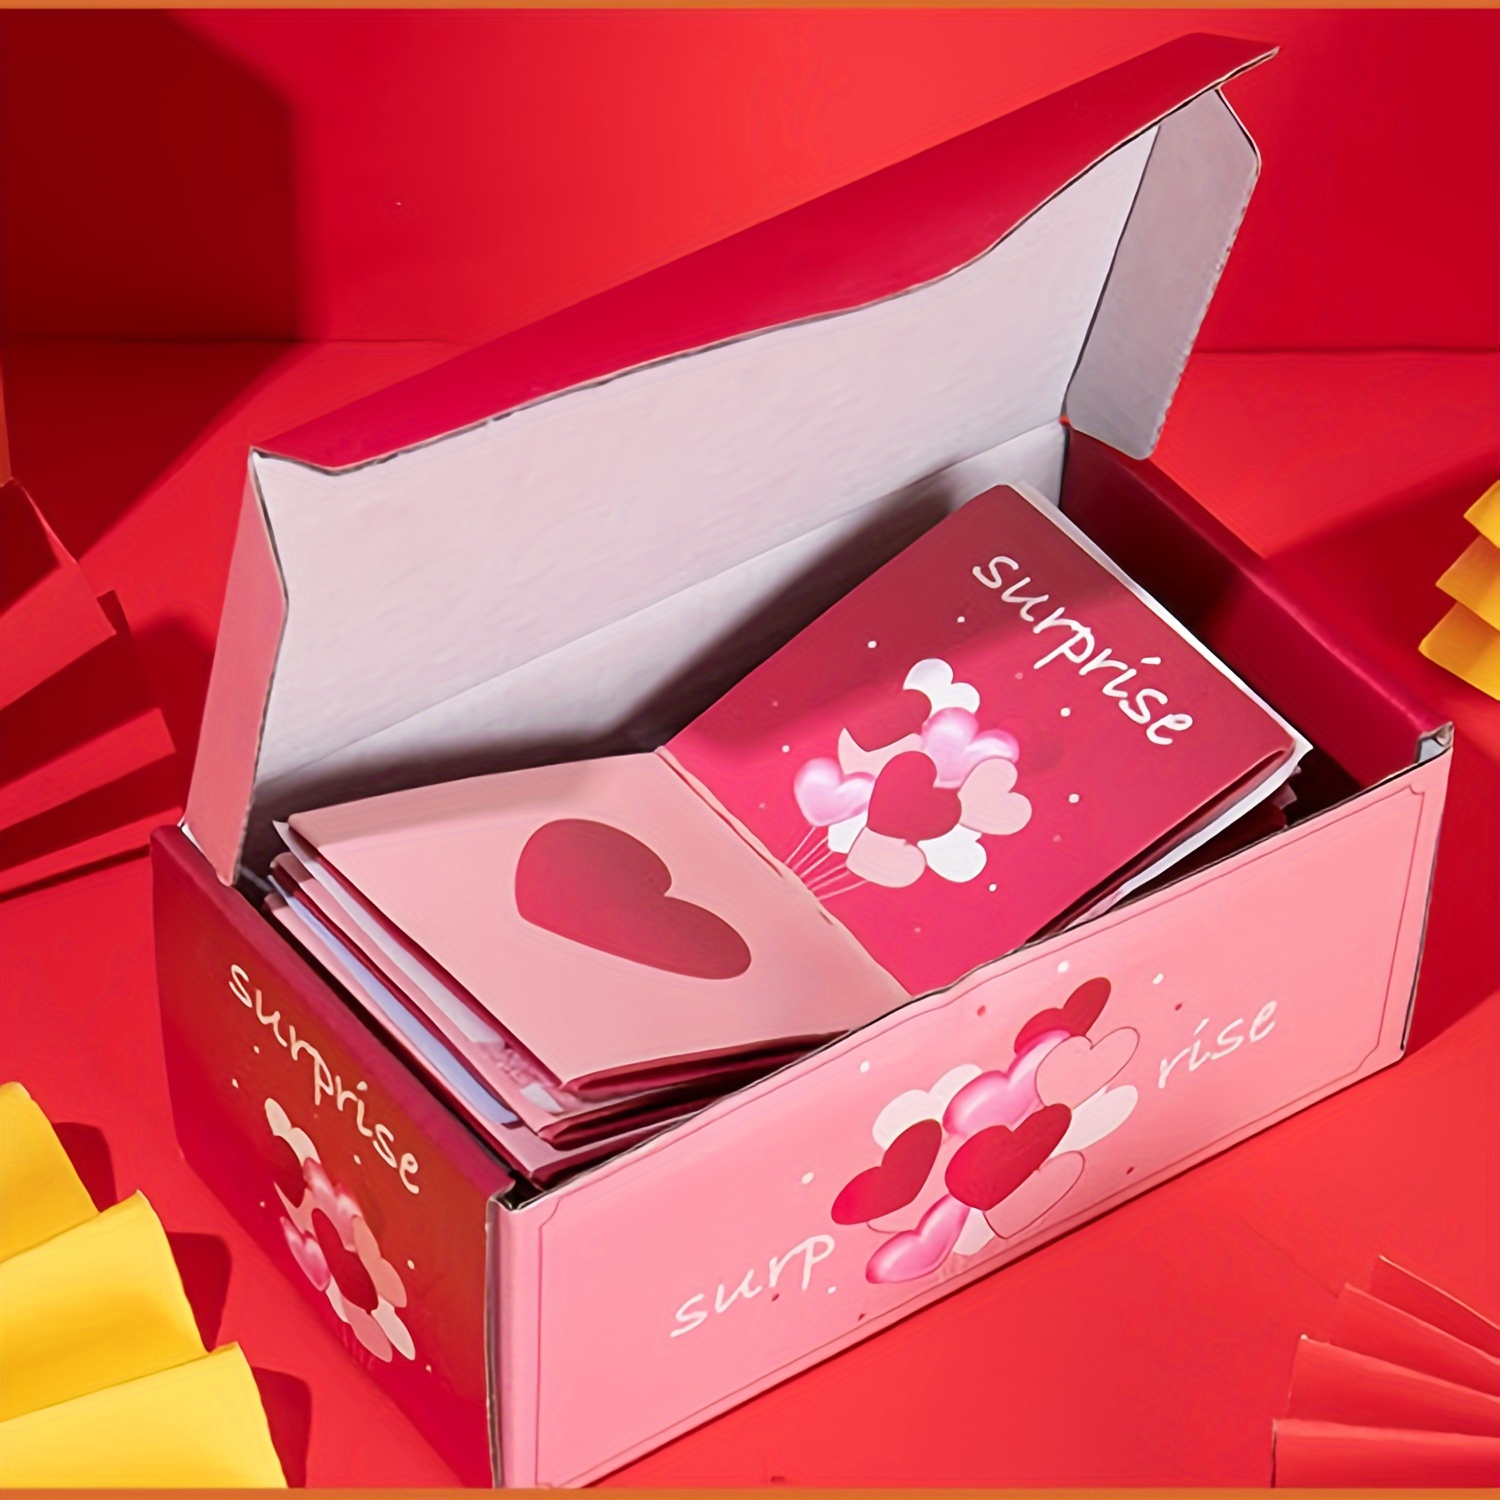 Sdjma Surprise Gift Box Explosion for Money, Unique Folding Bouncing Red Envelope Gift Box with Confetti, Cash Explosion Luxury Gift Box for Birthday